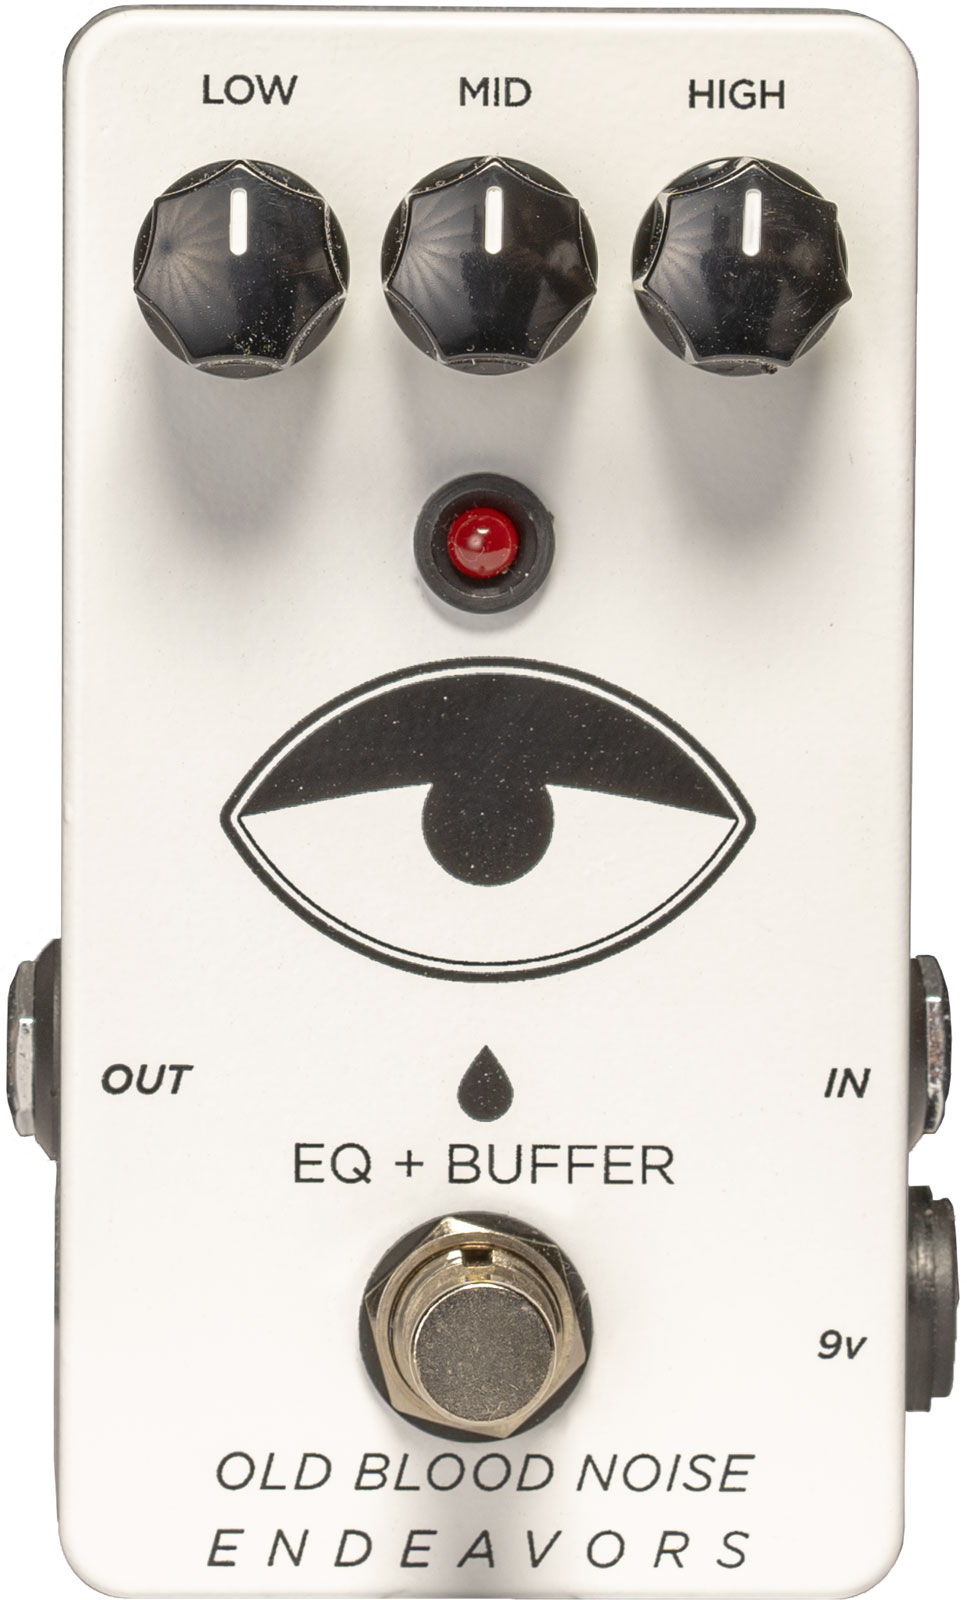 OLD BLOOD NOISE ENDEAVORS UTILITY 3: BUFFER + EQ